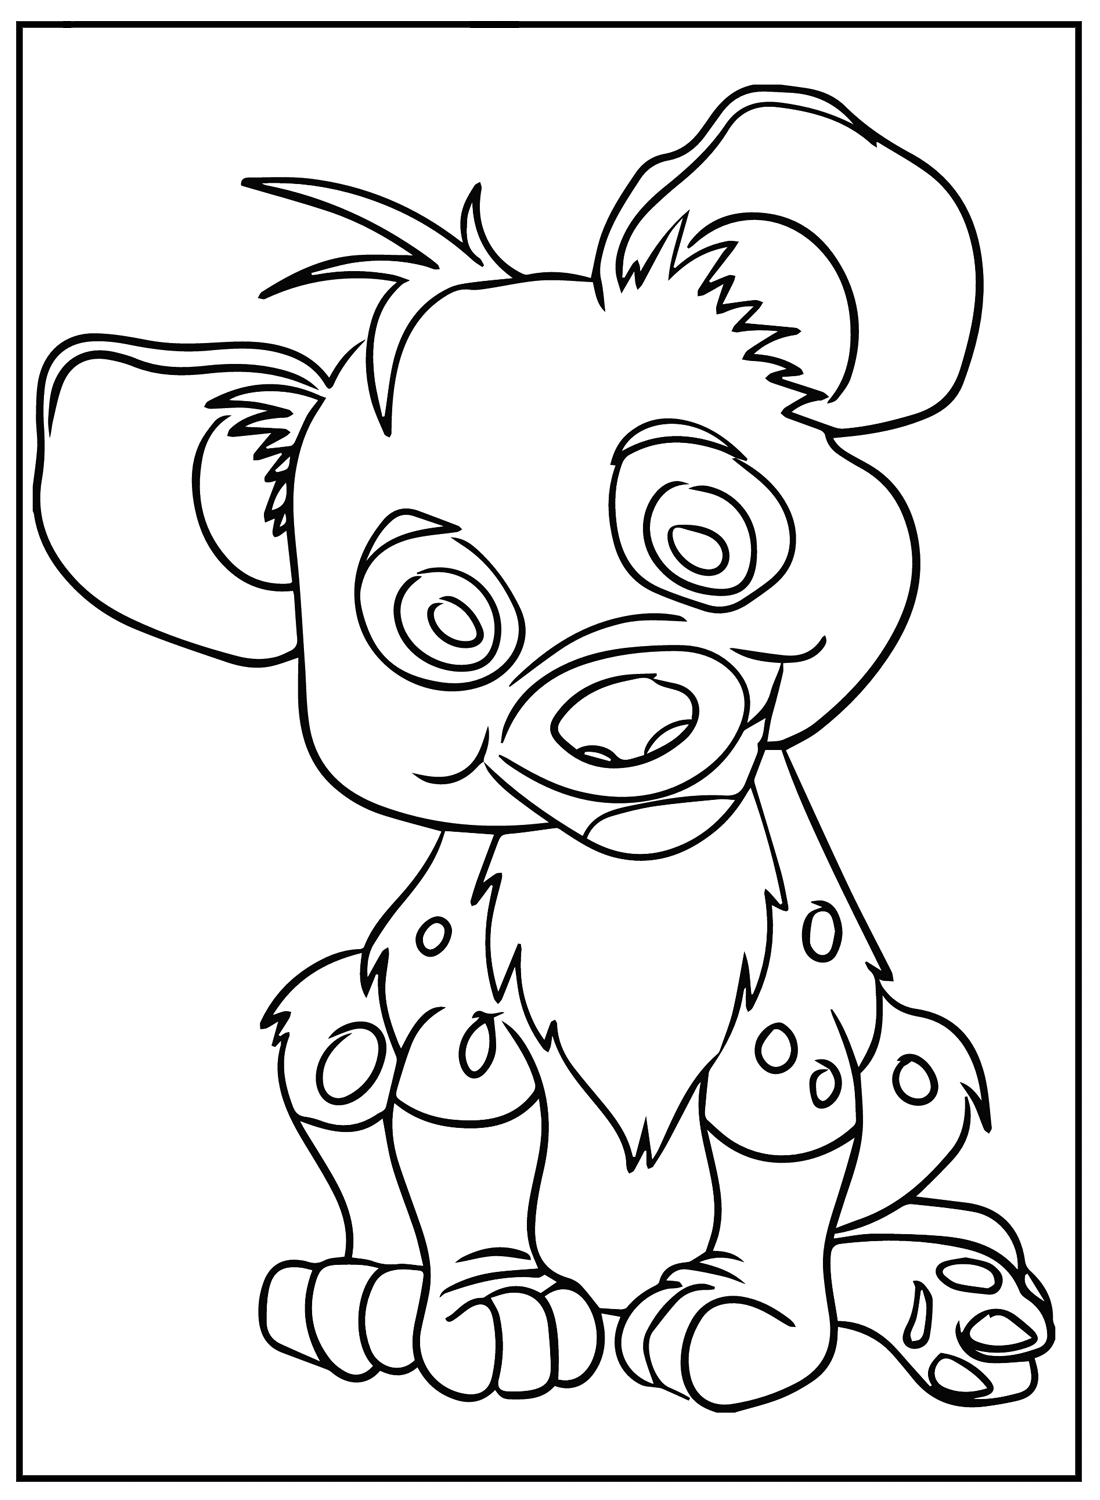 Hyena Smiling Coloring Pages